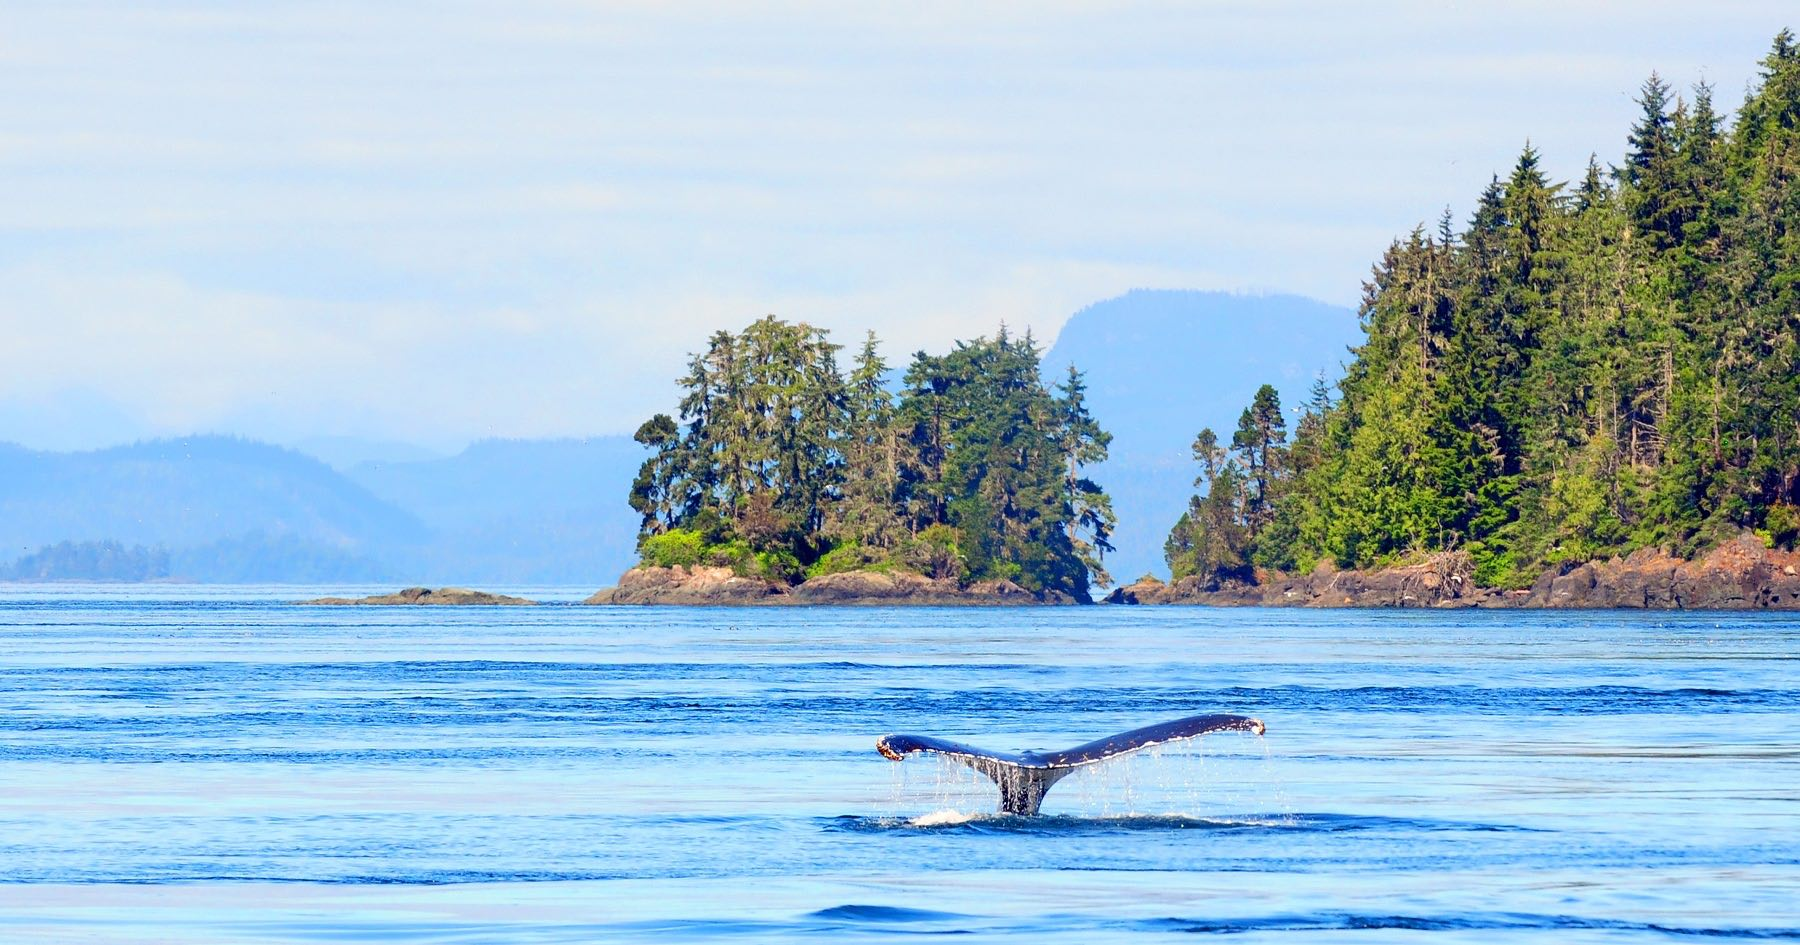 Tail of a humpback whale breeches the water with forests on the background.